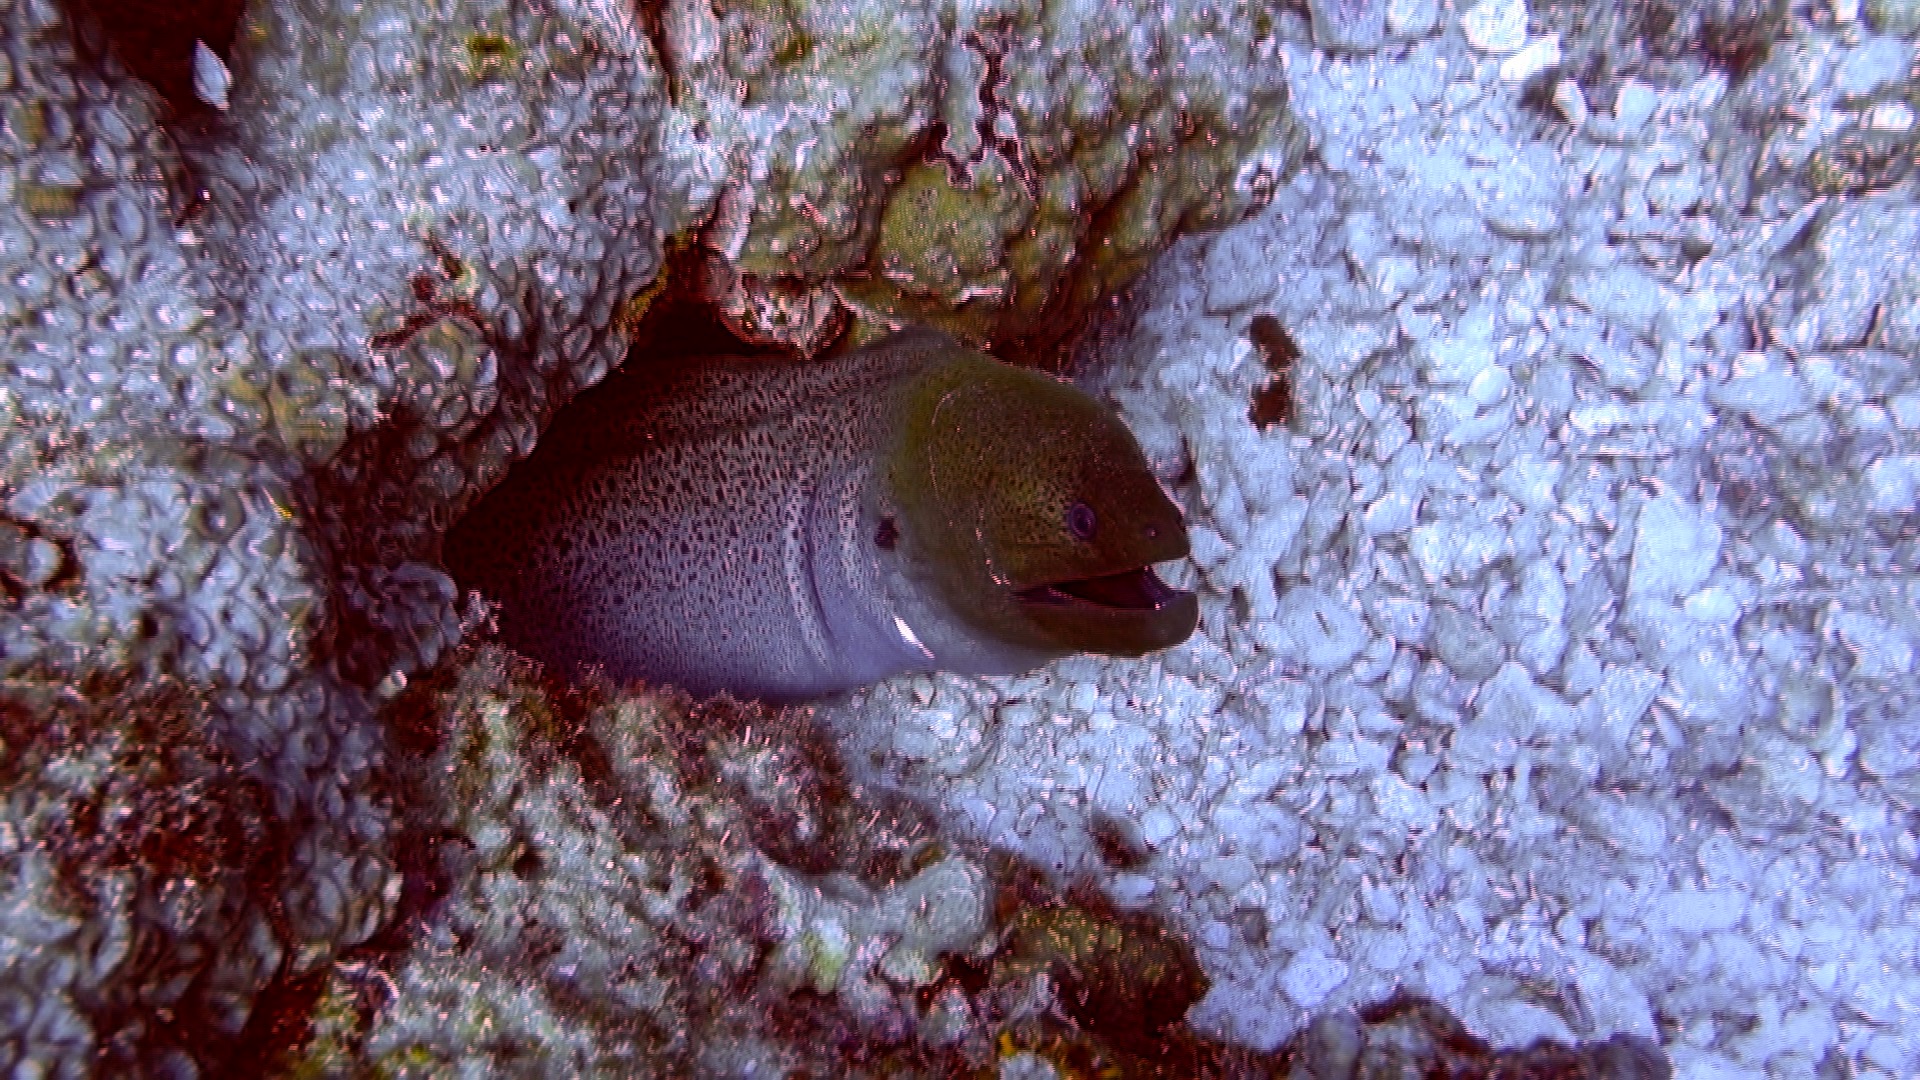 A moray eel in Koh Lanta while diving